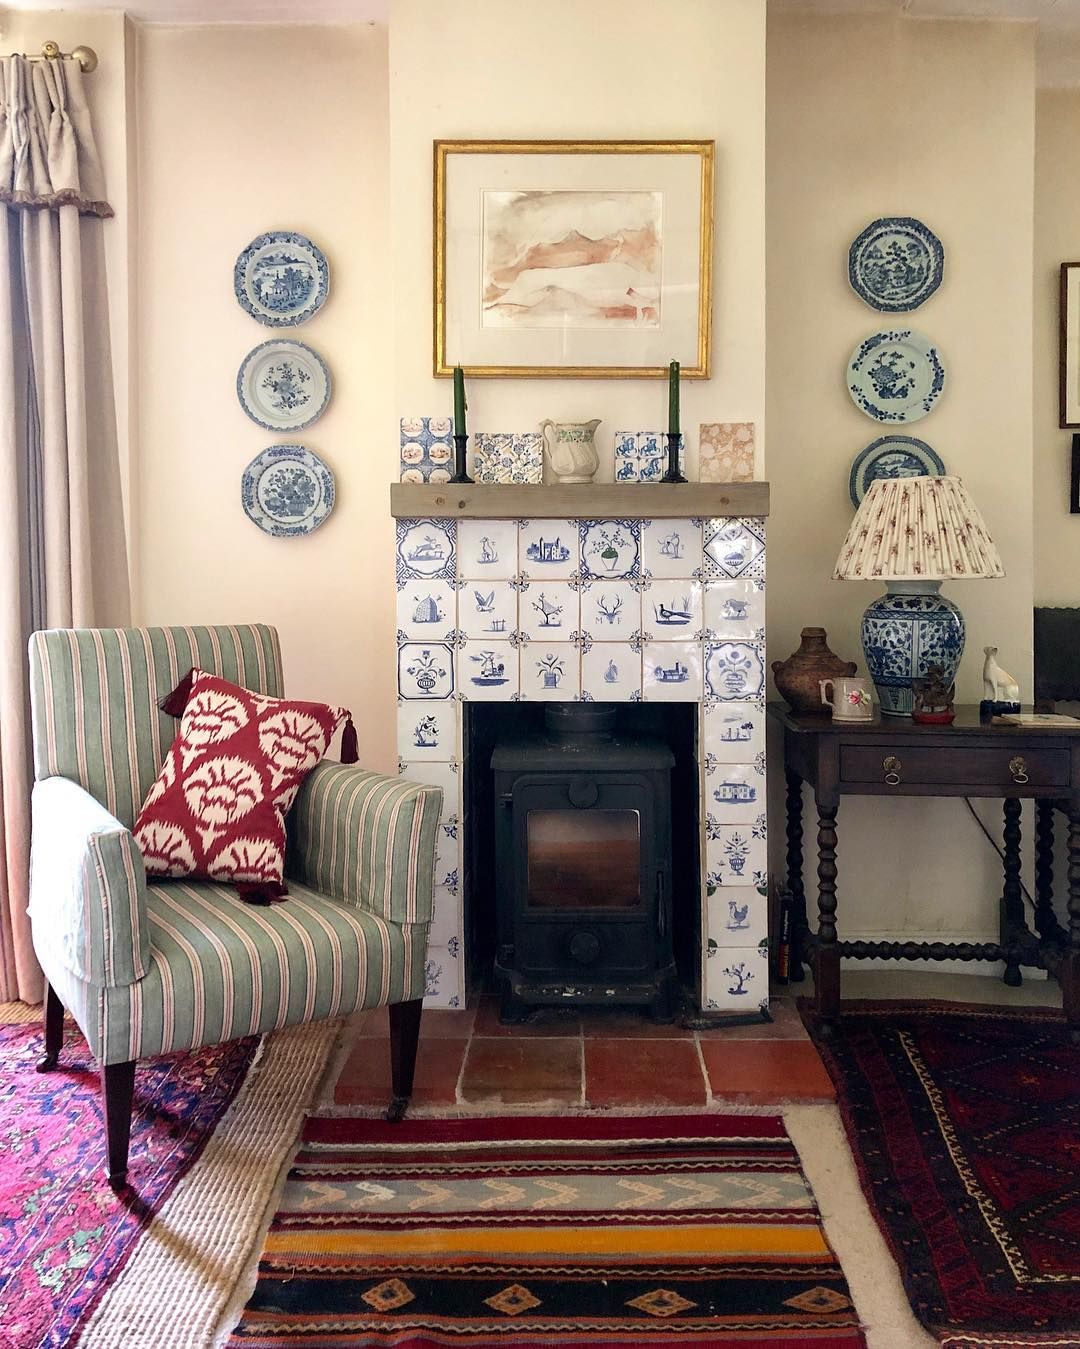 Black and White Fireplace New Carlos Sánchez Garc­a On Instagram “blue and White